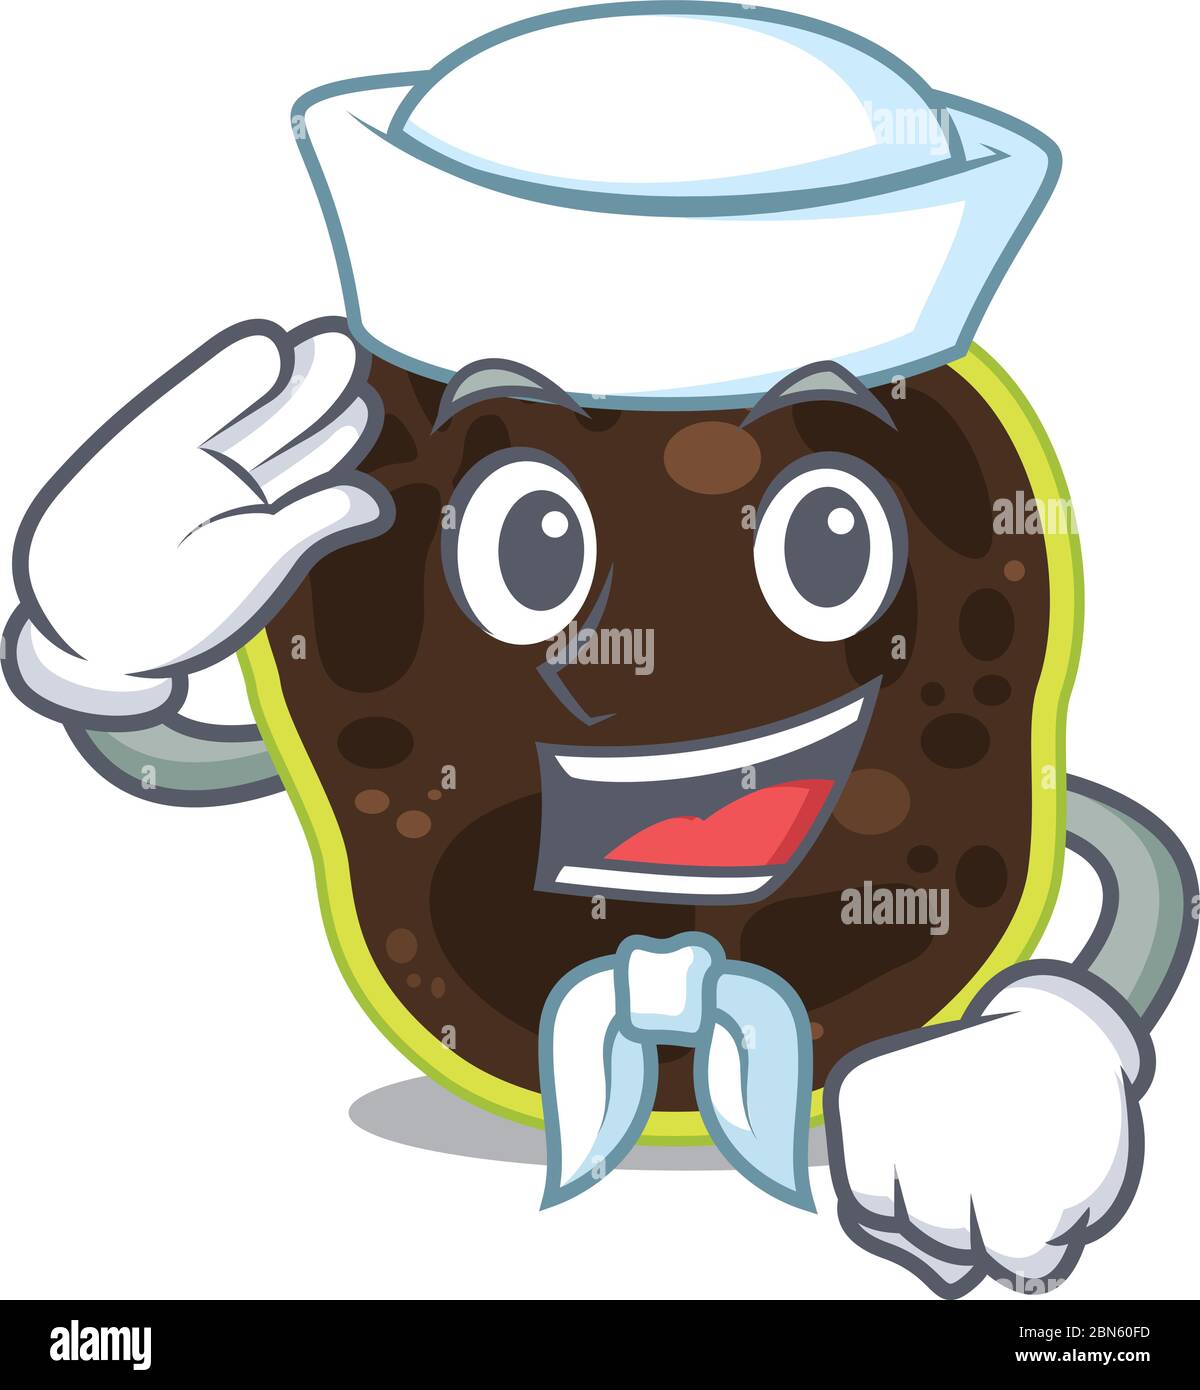 Smiley sailor cartoon character of firmicutes wearing white hat and tie Stock Vector